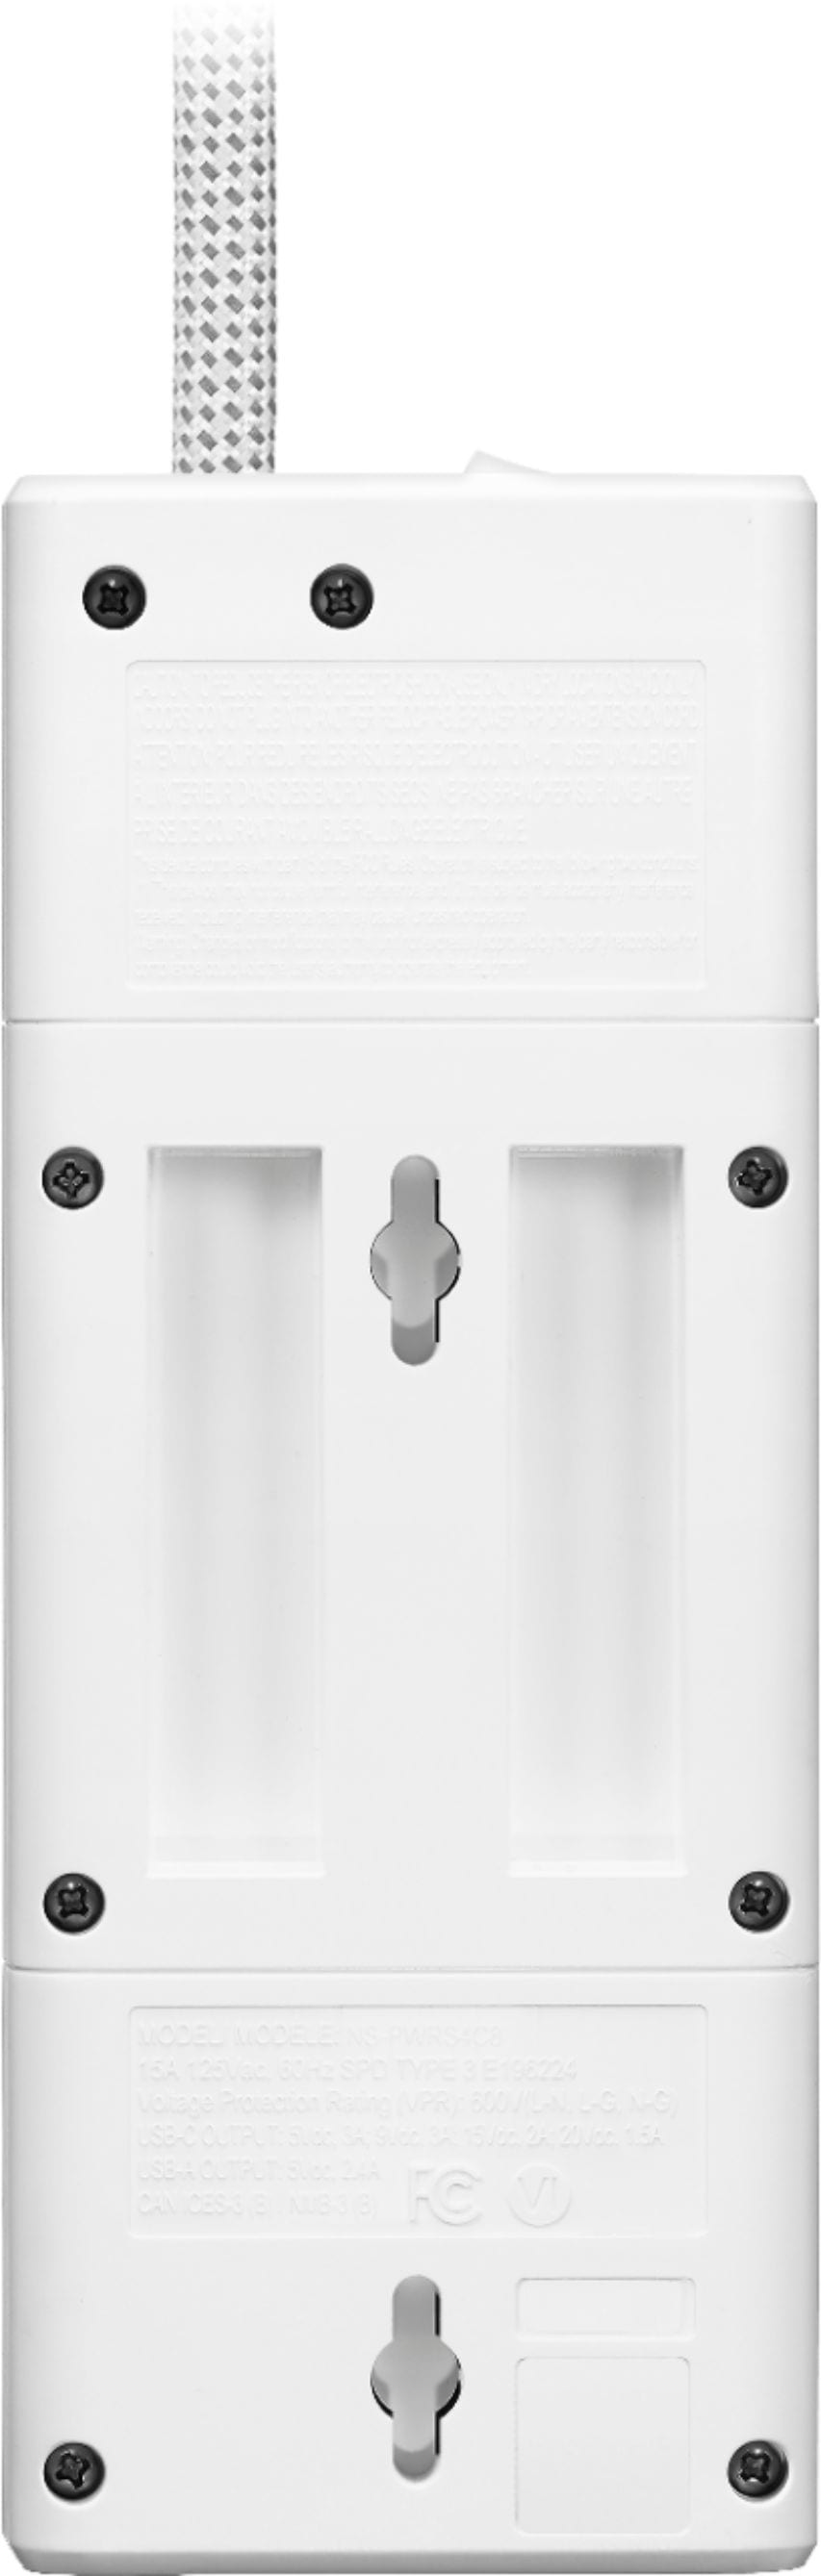 Insignia™ - 4-Outlet/3-USB Surge Protector Strip - White_3